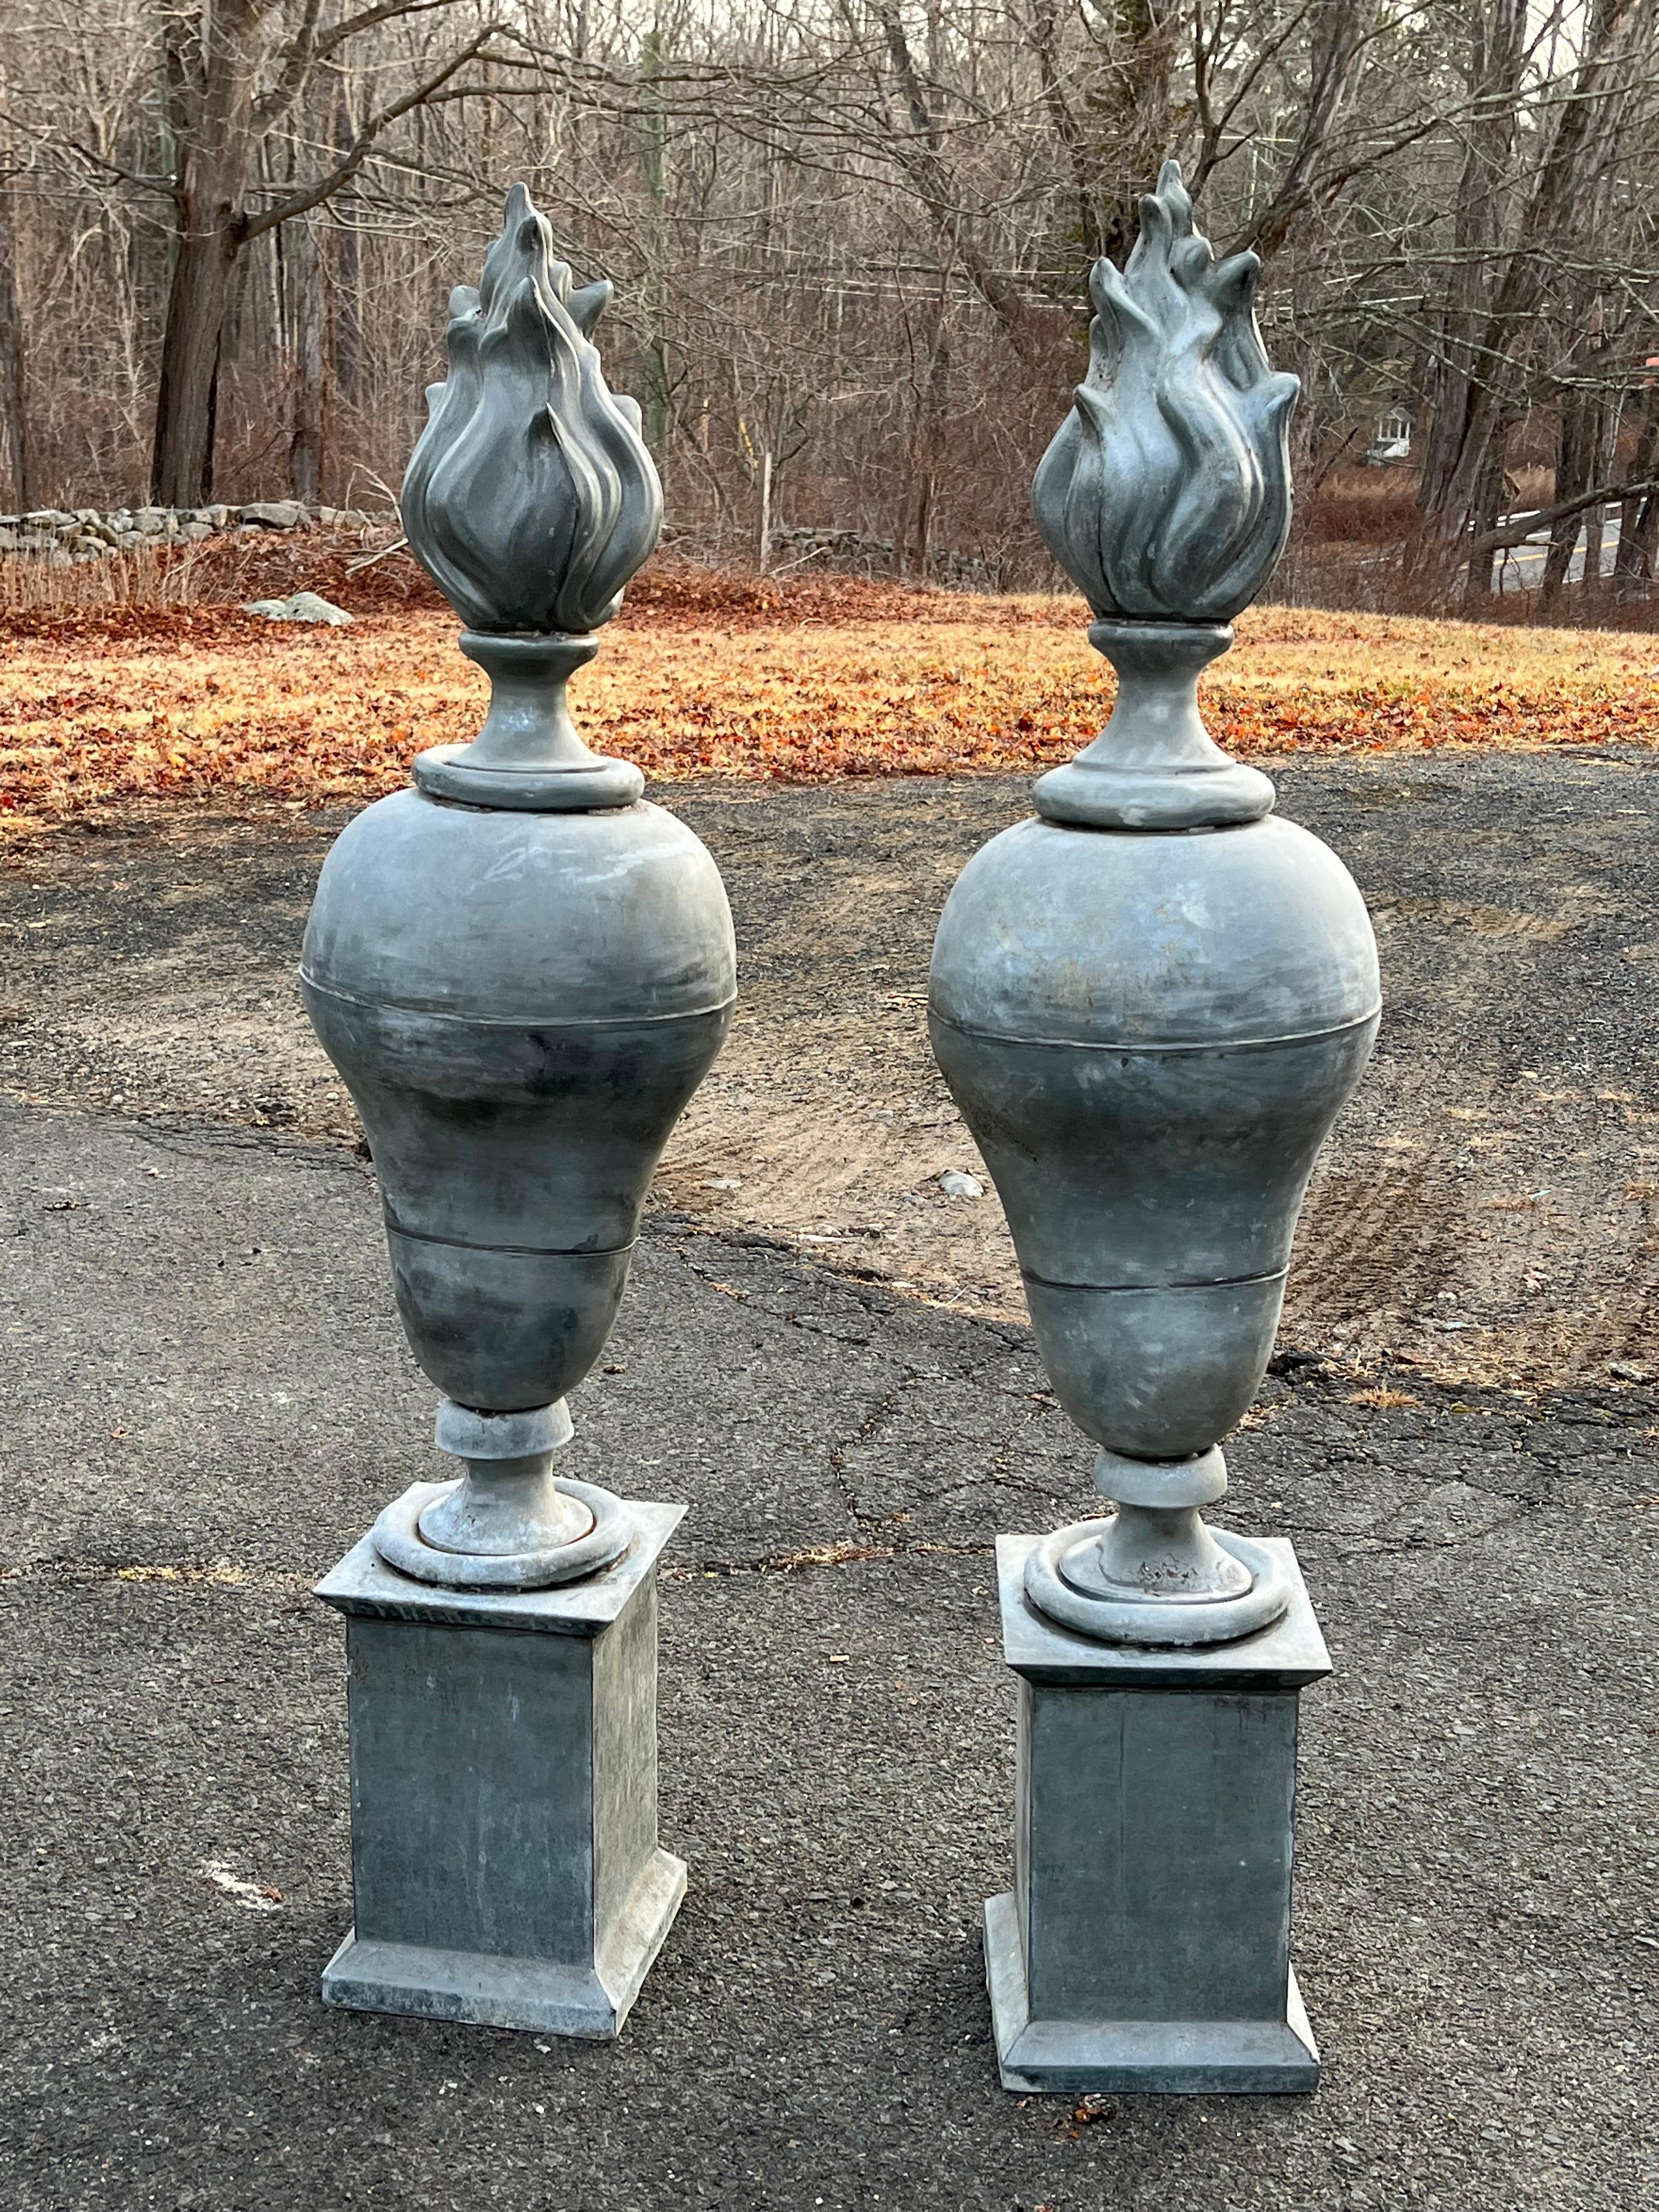 A pair of impressive size zinc urn-form architectural finials with flame tops and square bases, mid 19th century French.
A near identical pair was sold at Stair Galleries 9/08/22 lot #0066.
Naturally patinated, each in 2 parts.